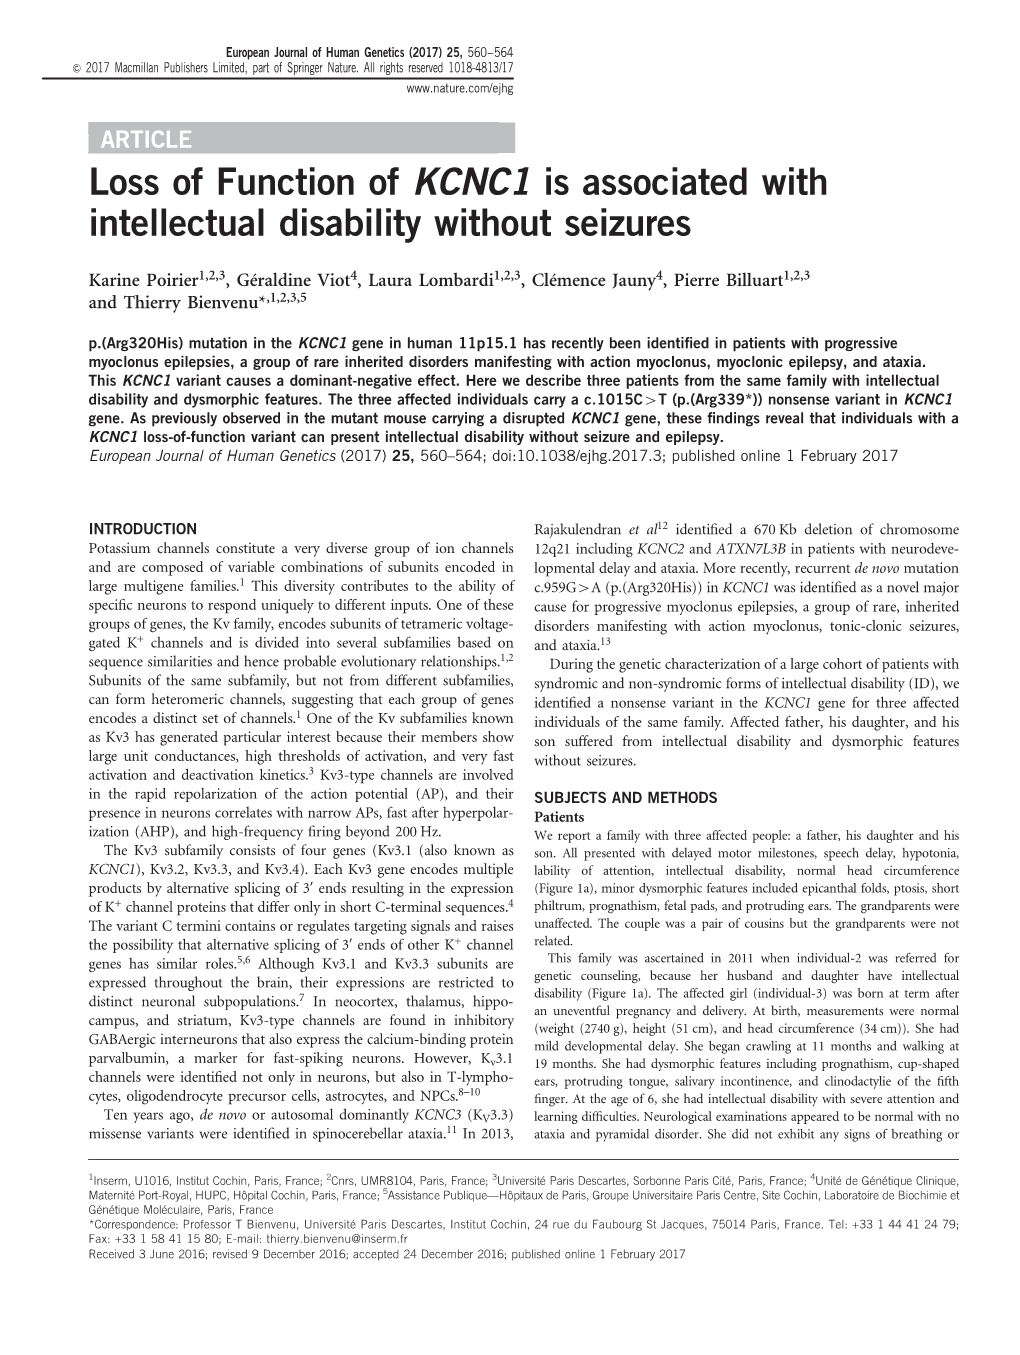 Loss of Function of KCNC1 Is Associated with Intellectual Disability Without Seizures